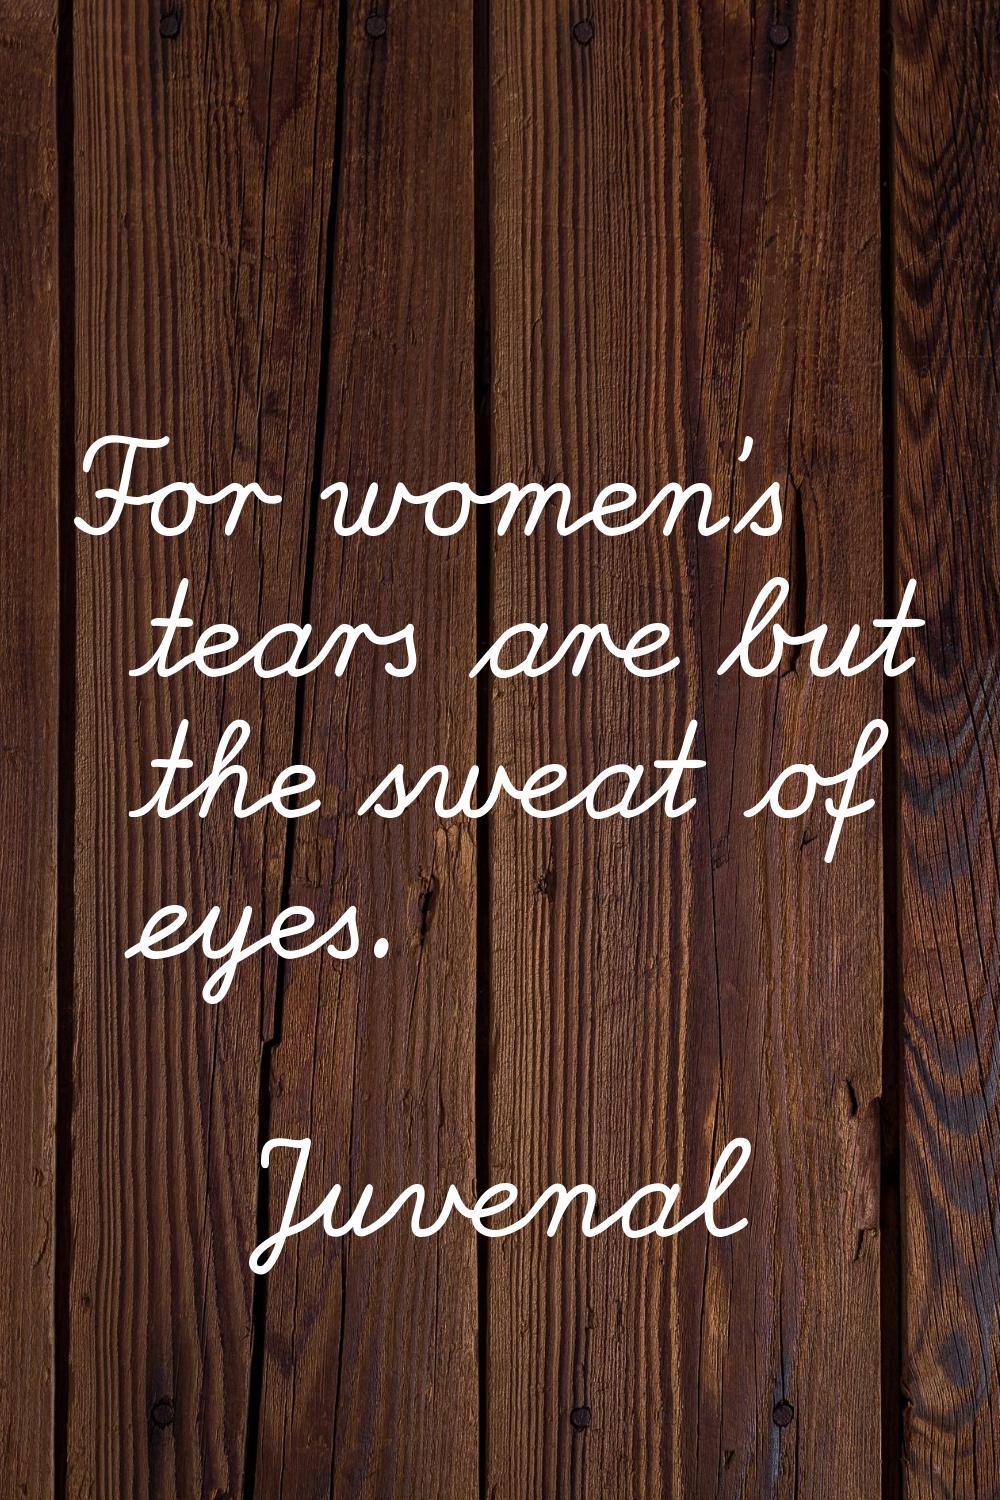 For women's tears are but the sweat of eyes.